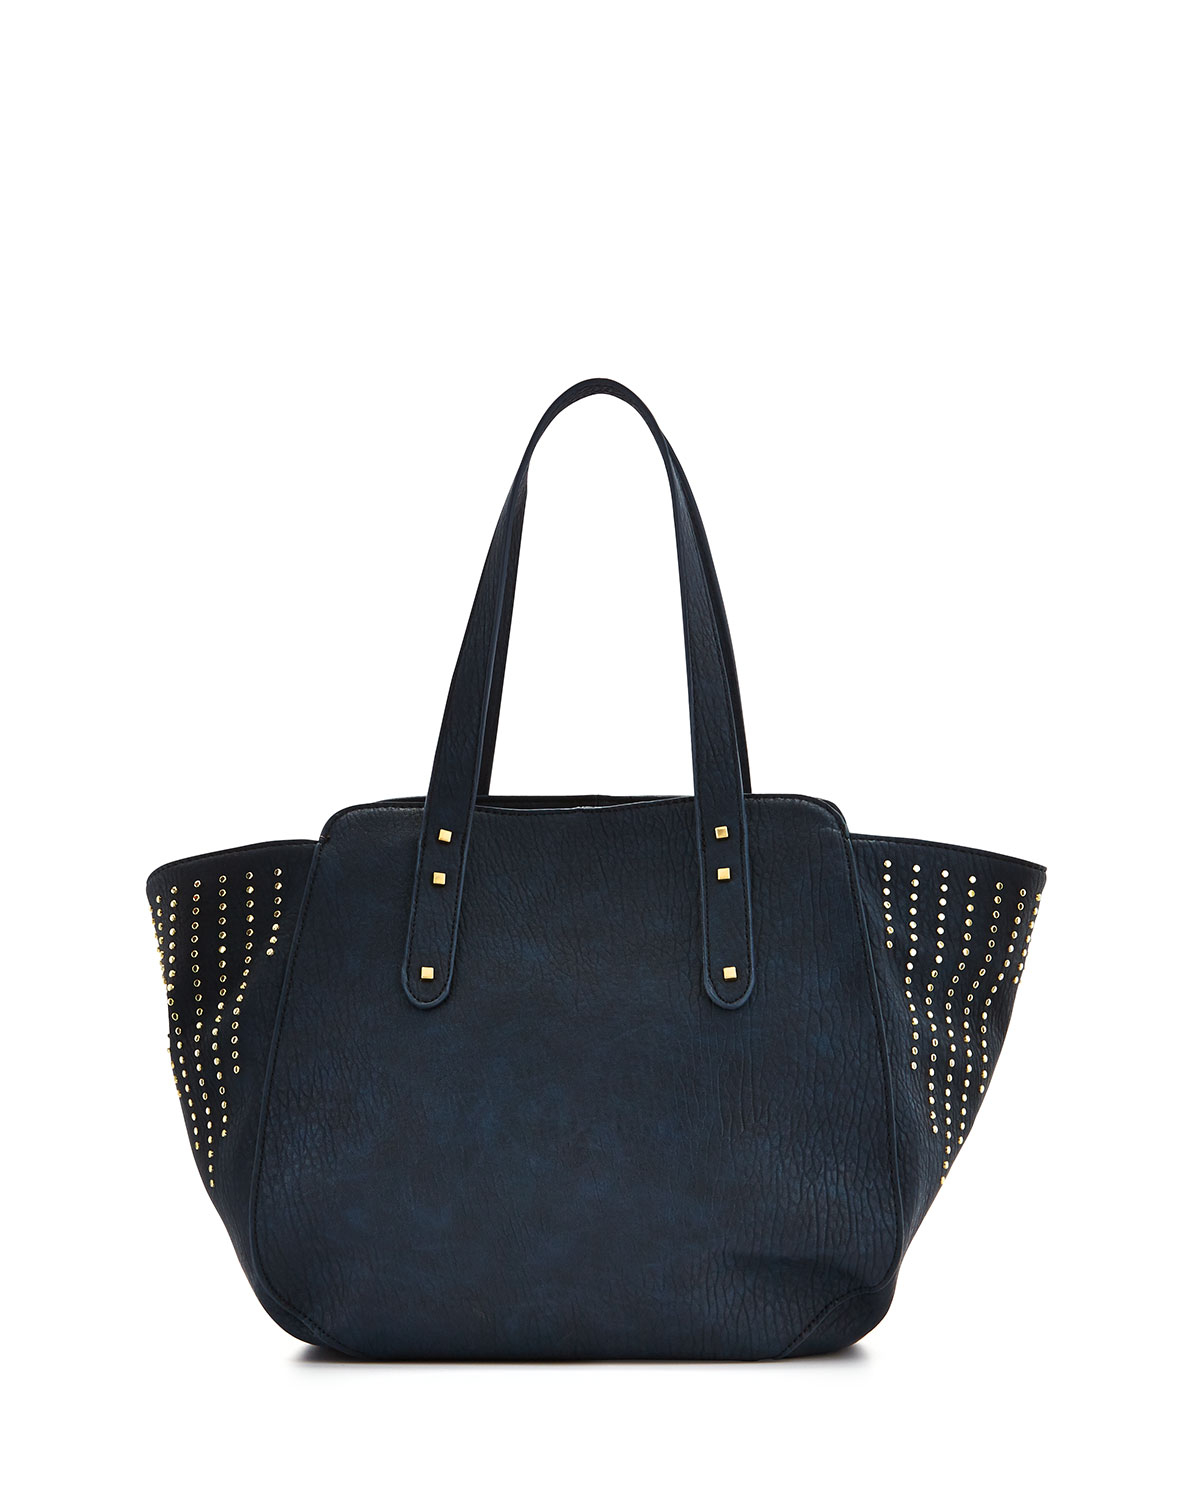 Neiman marcus Faux-leather Studded Tote Bag in Blue | Lyst